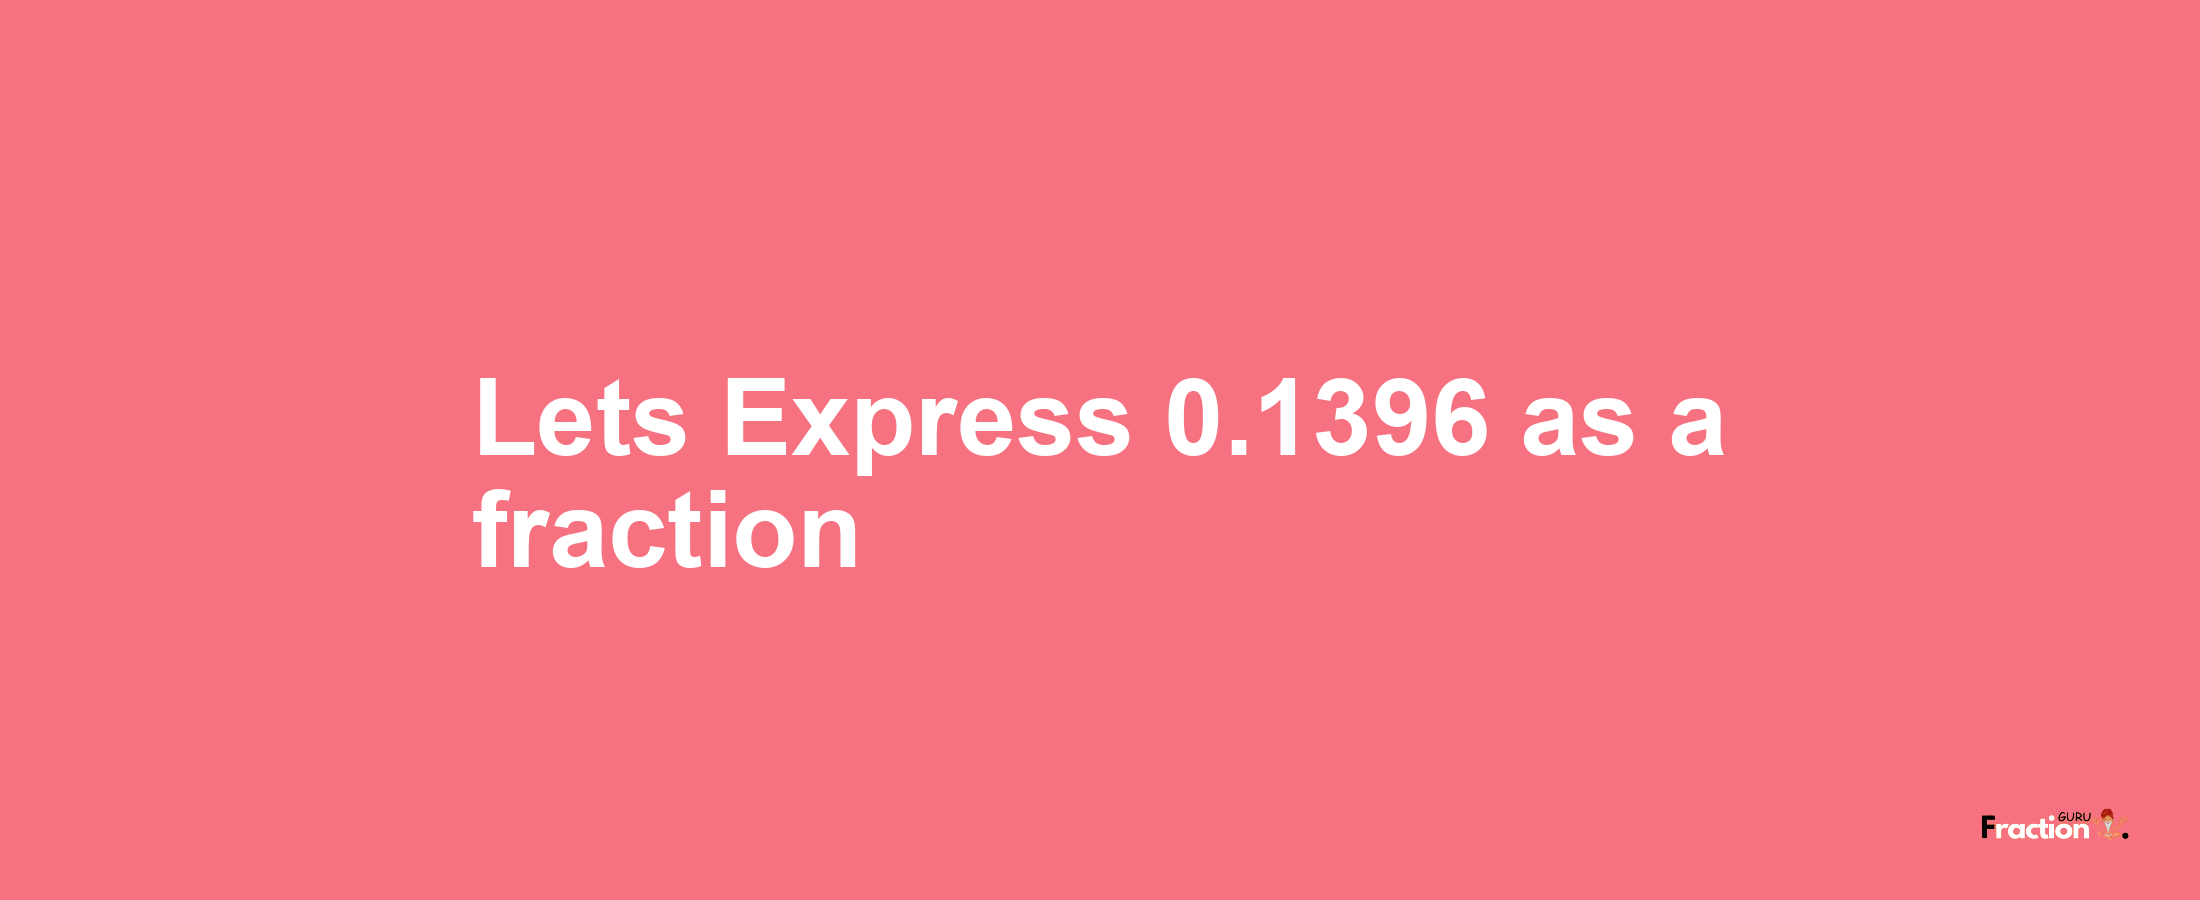 Lets Express 0.1396 as afraction